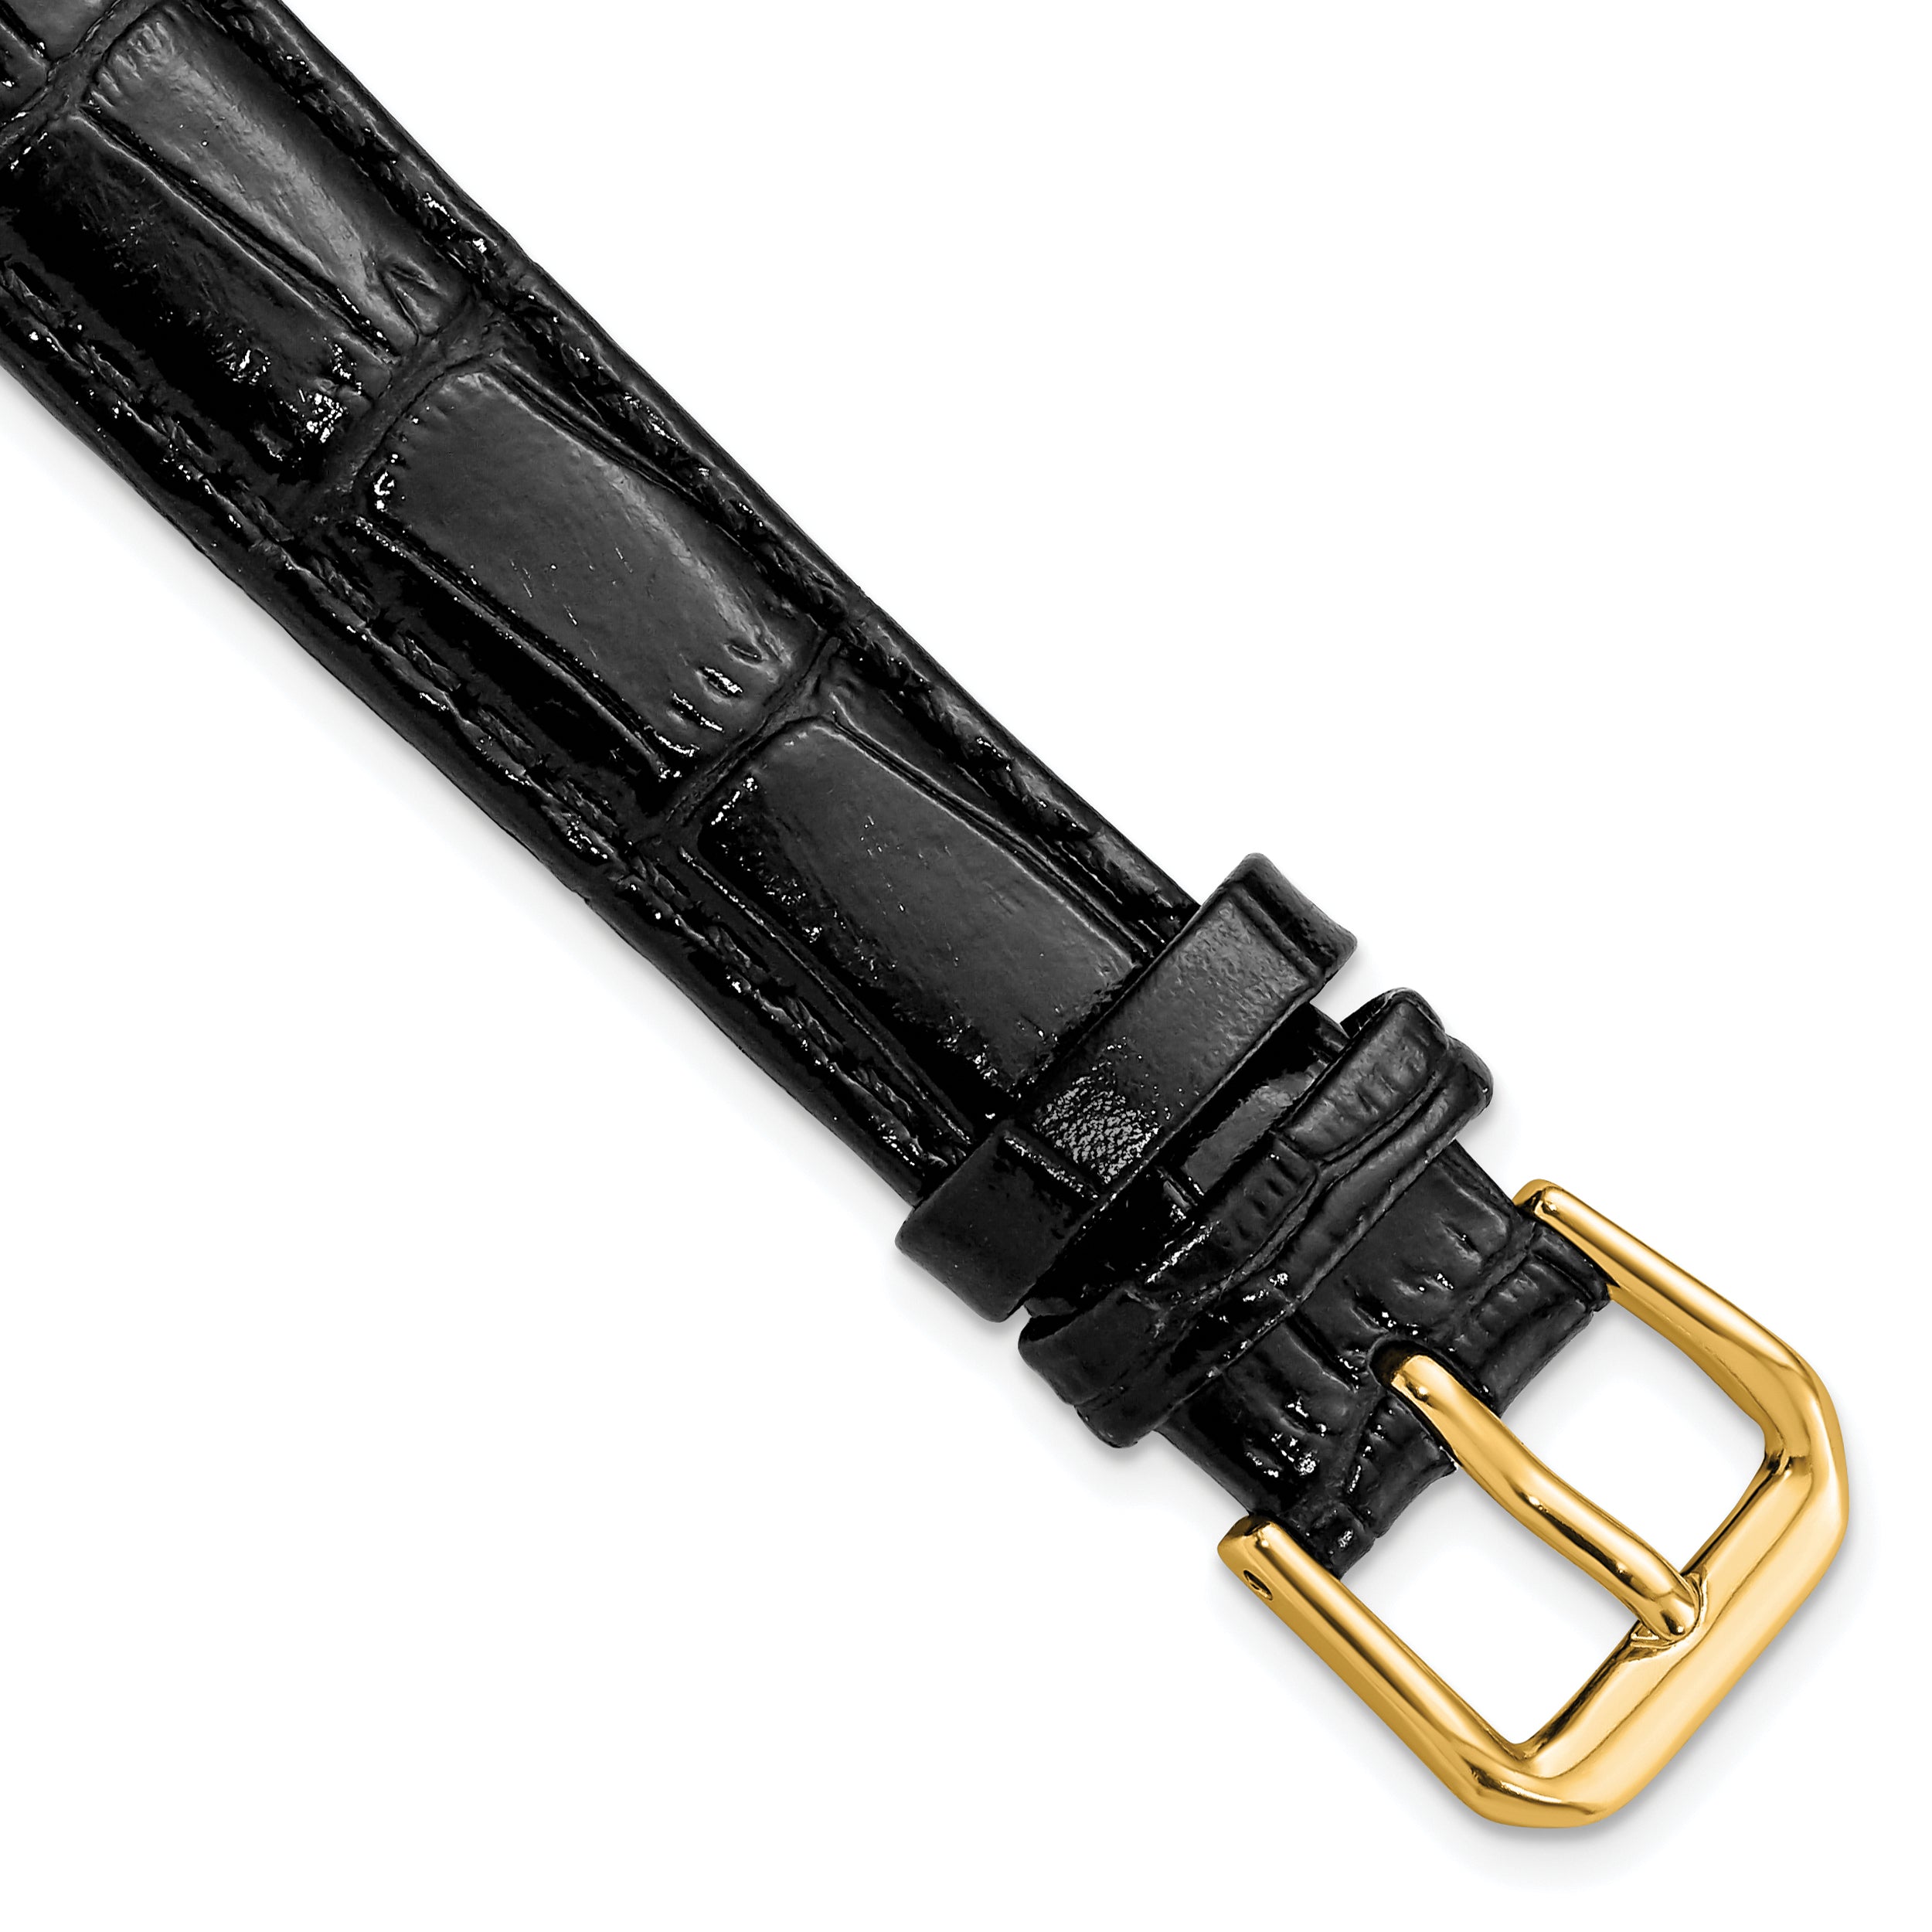 DeBeer 14mm Black Crocodile Grain Leather with Dark Stitching and Gold-tone Buckle 6.75 inch Watch Band